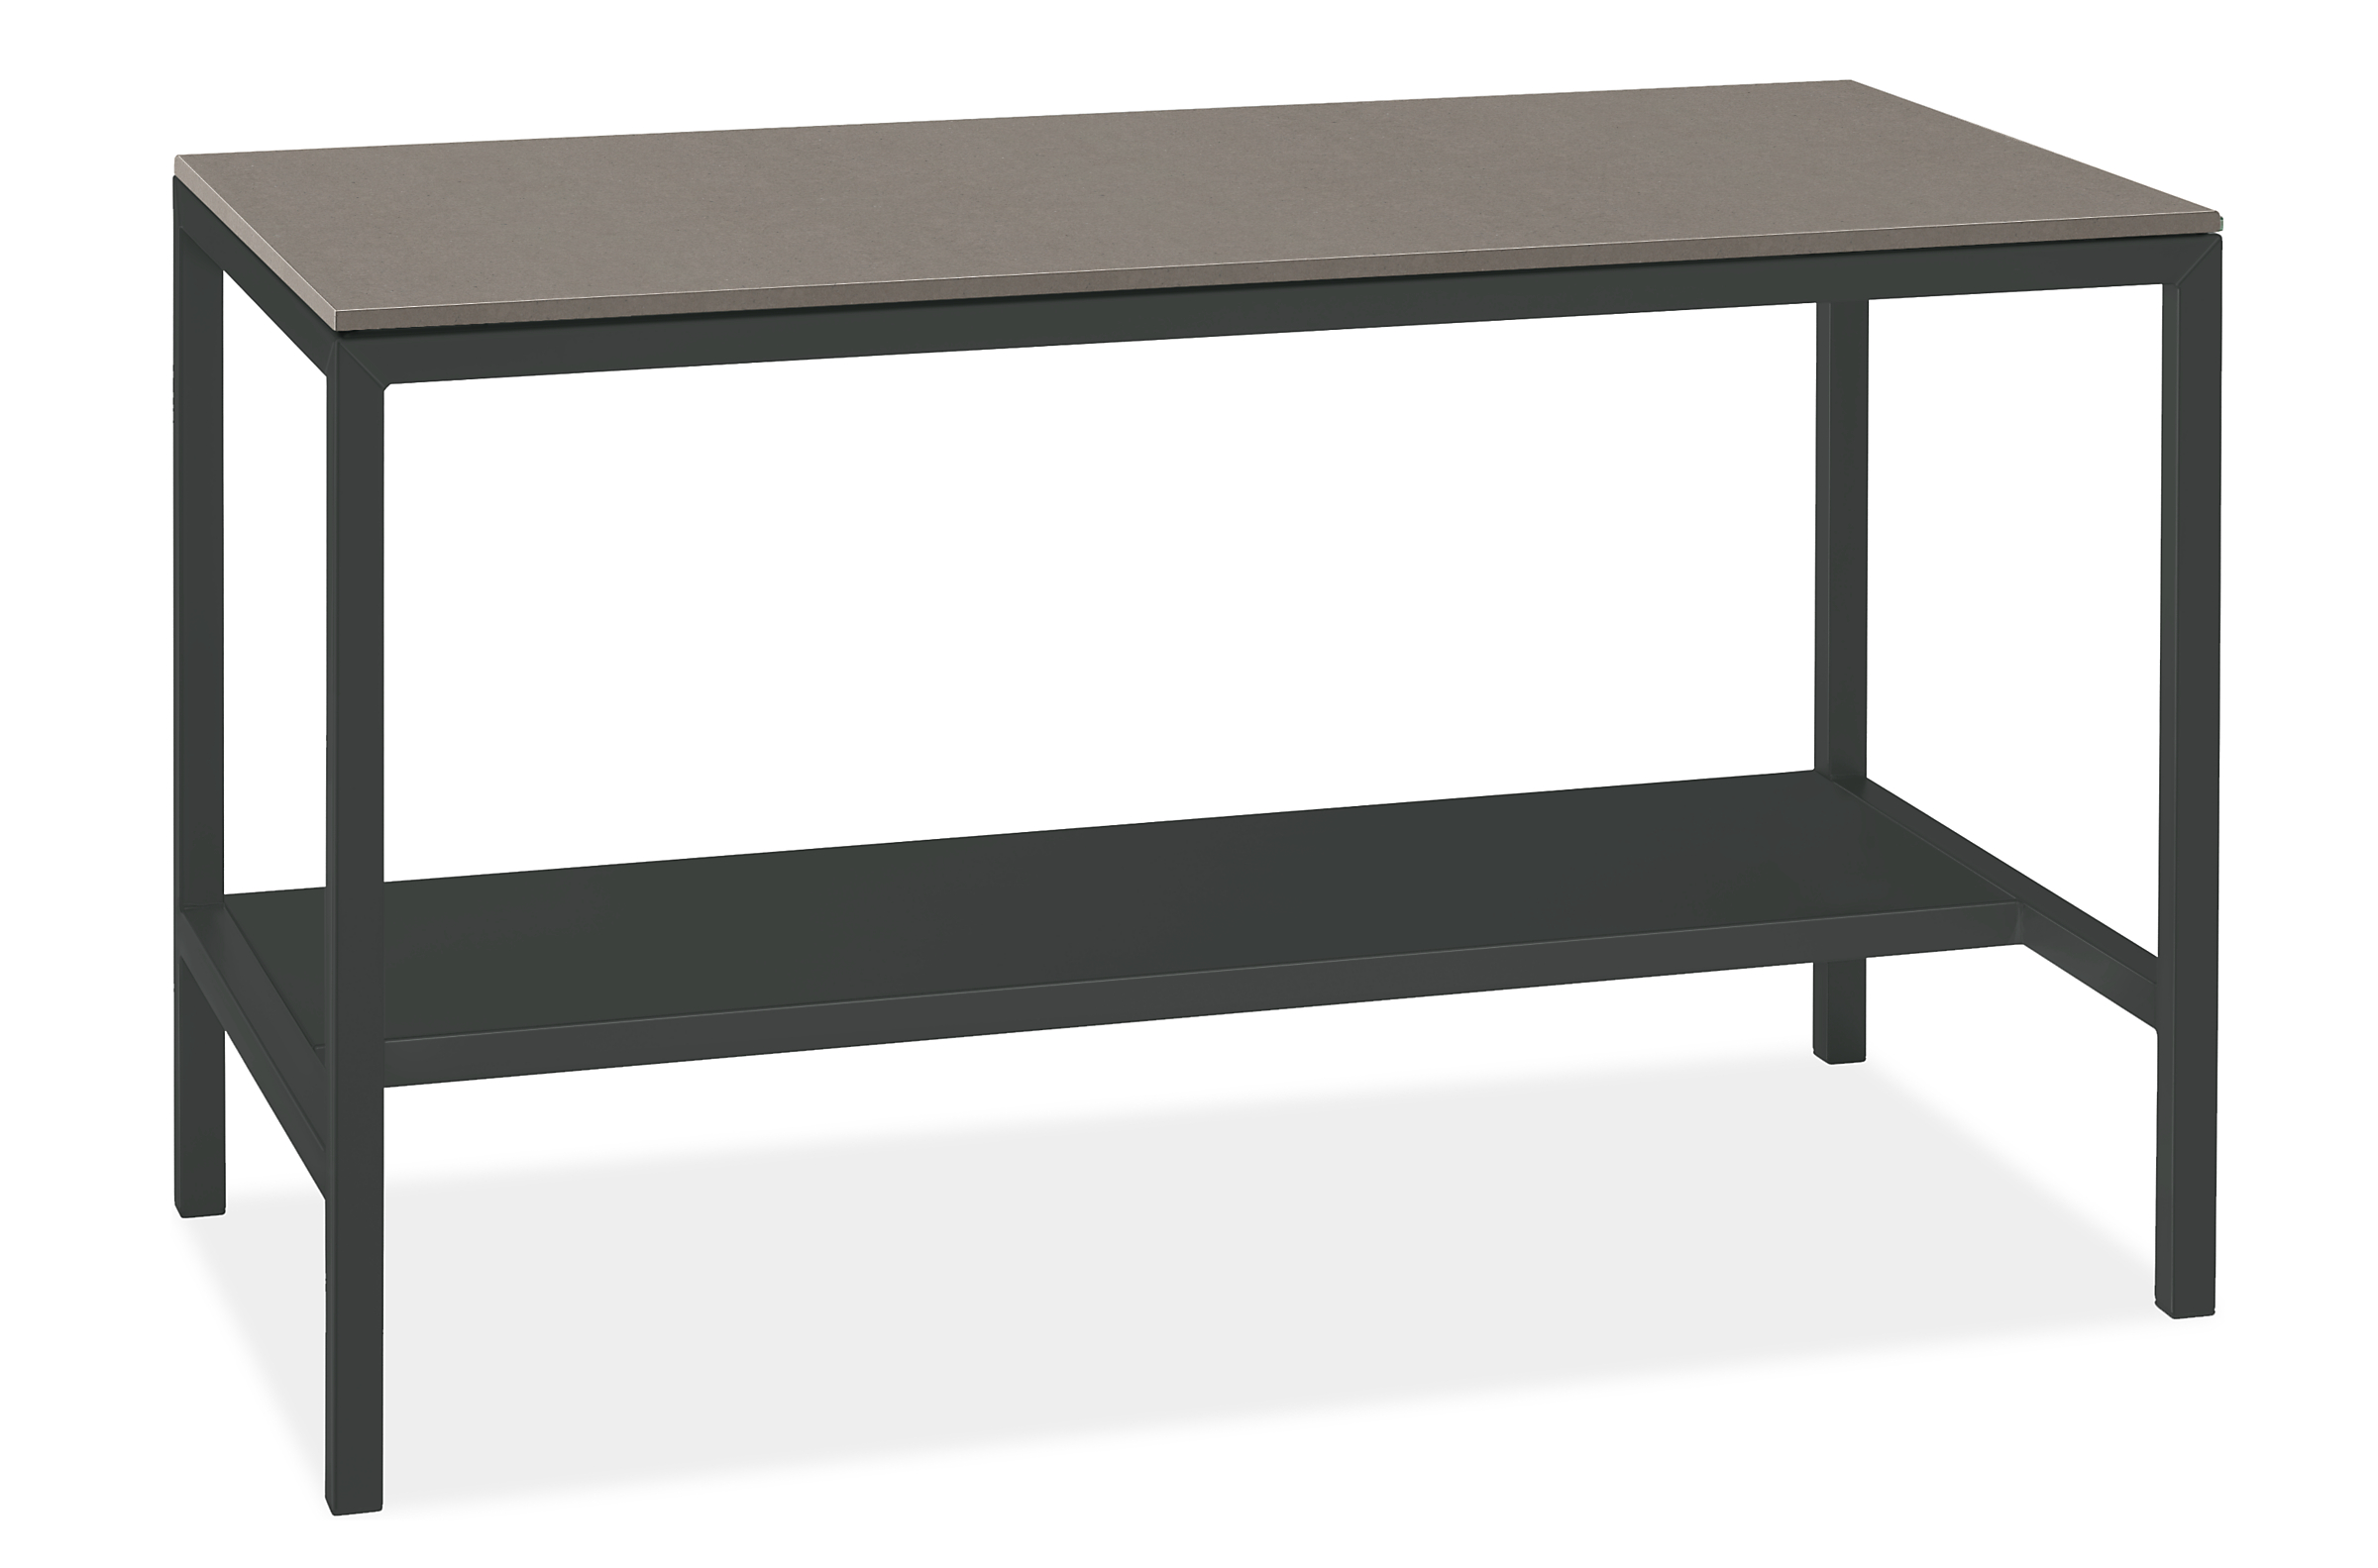 Parsons 60w 30d 35h Narrow Shelf Counter Table with 1.5" Leg